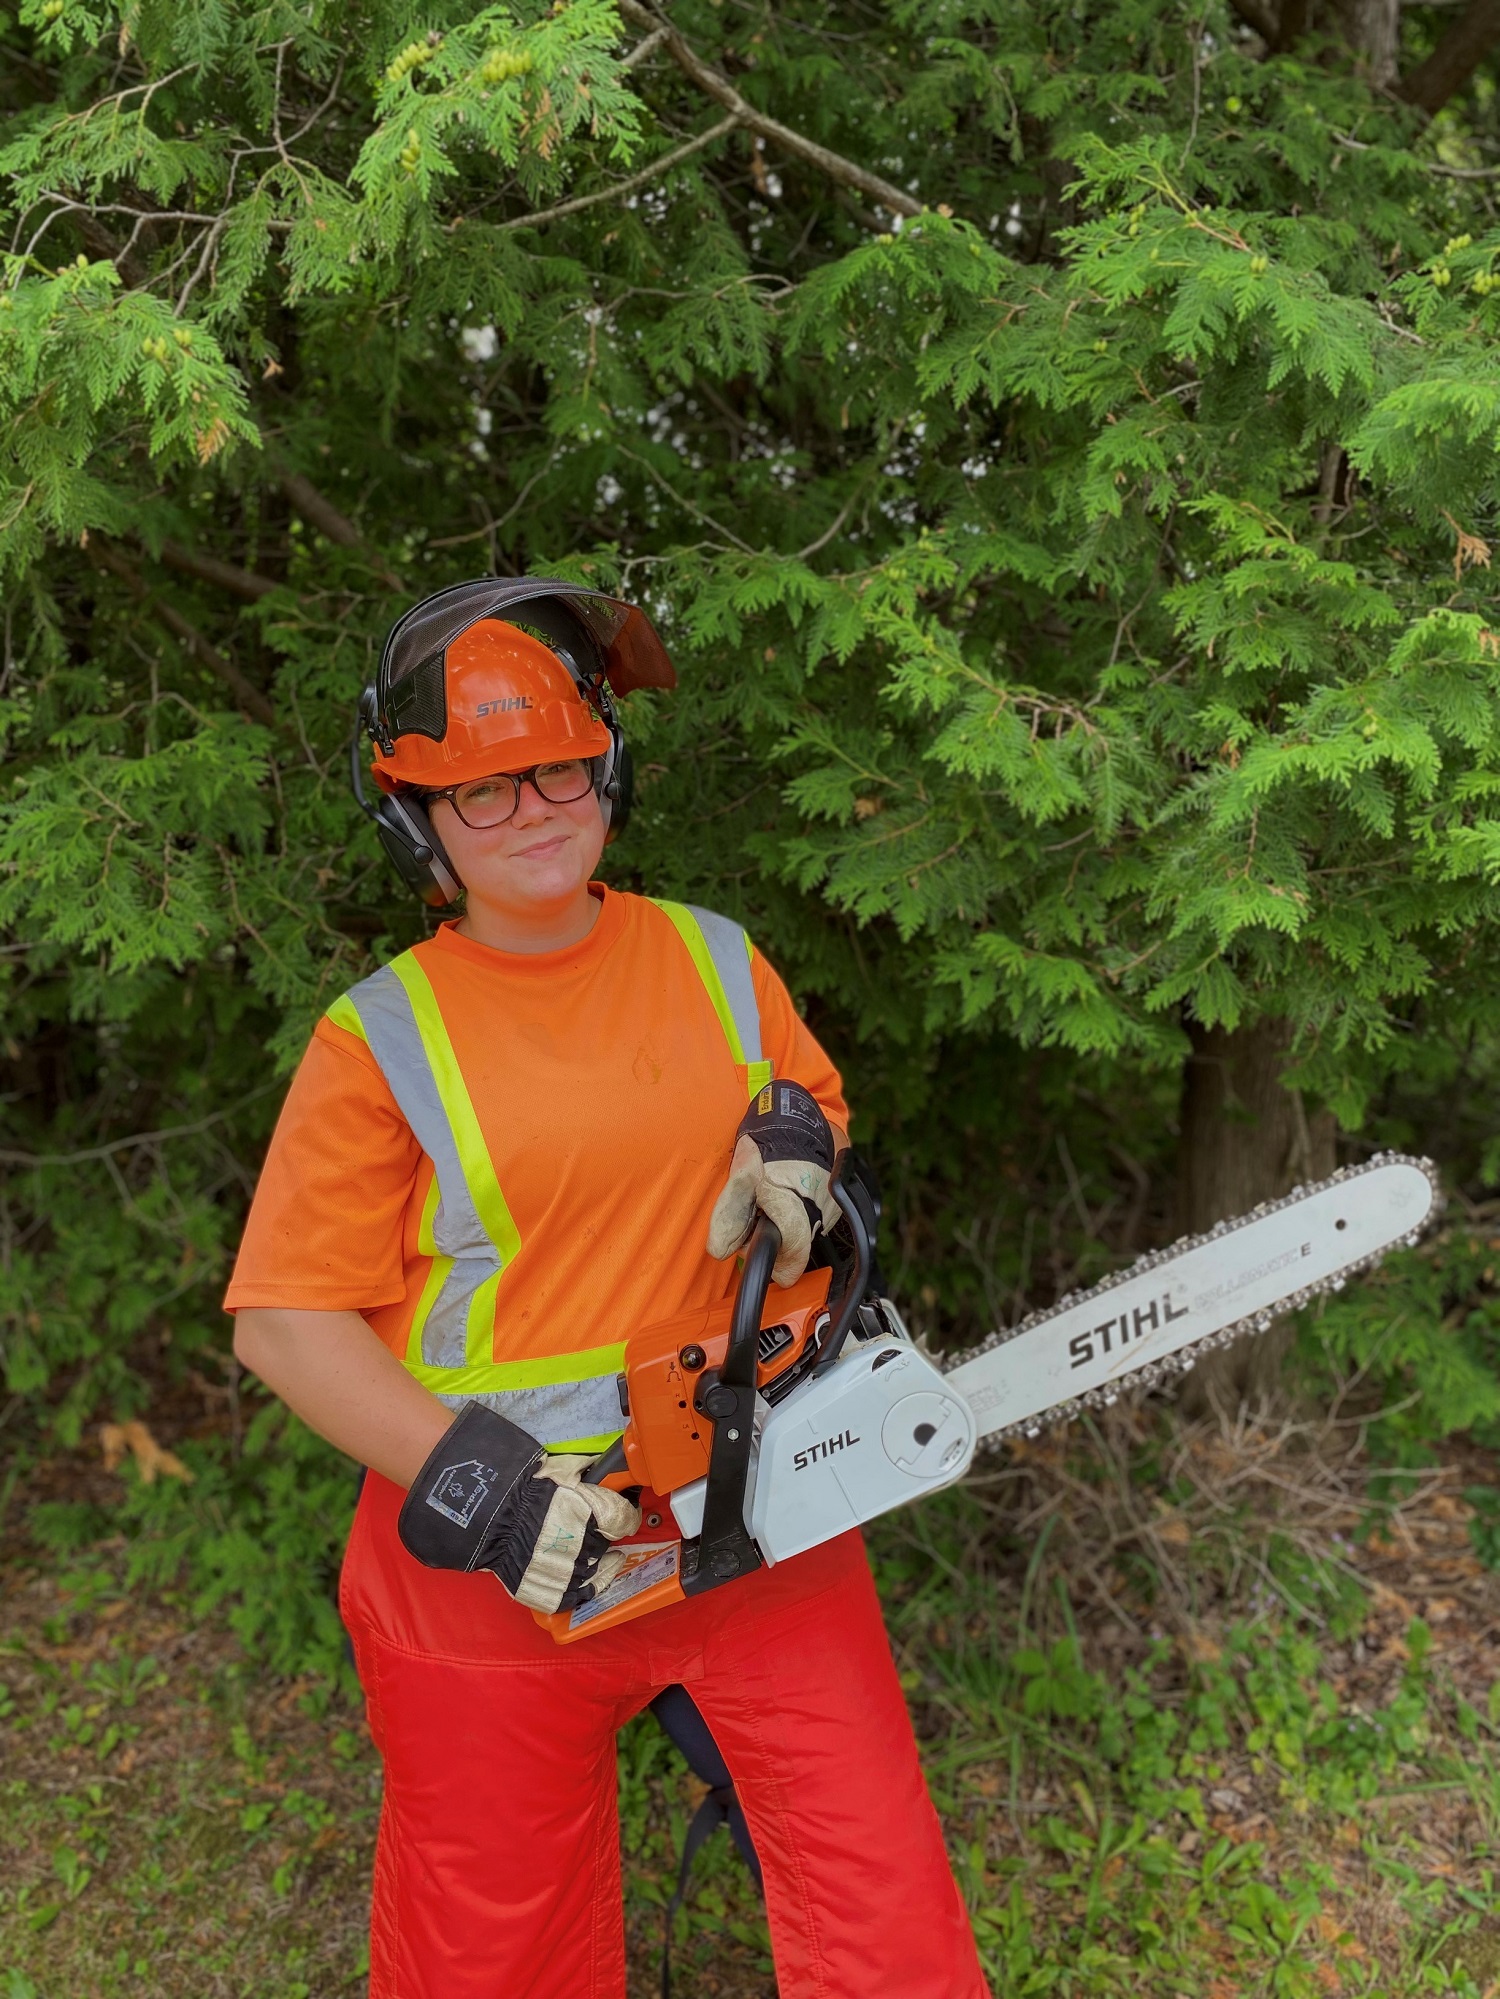 park staff holding chain saw